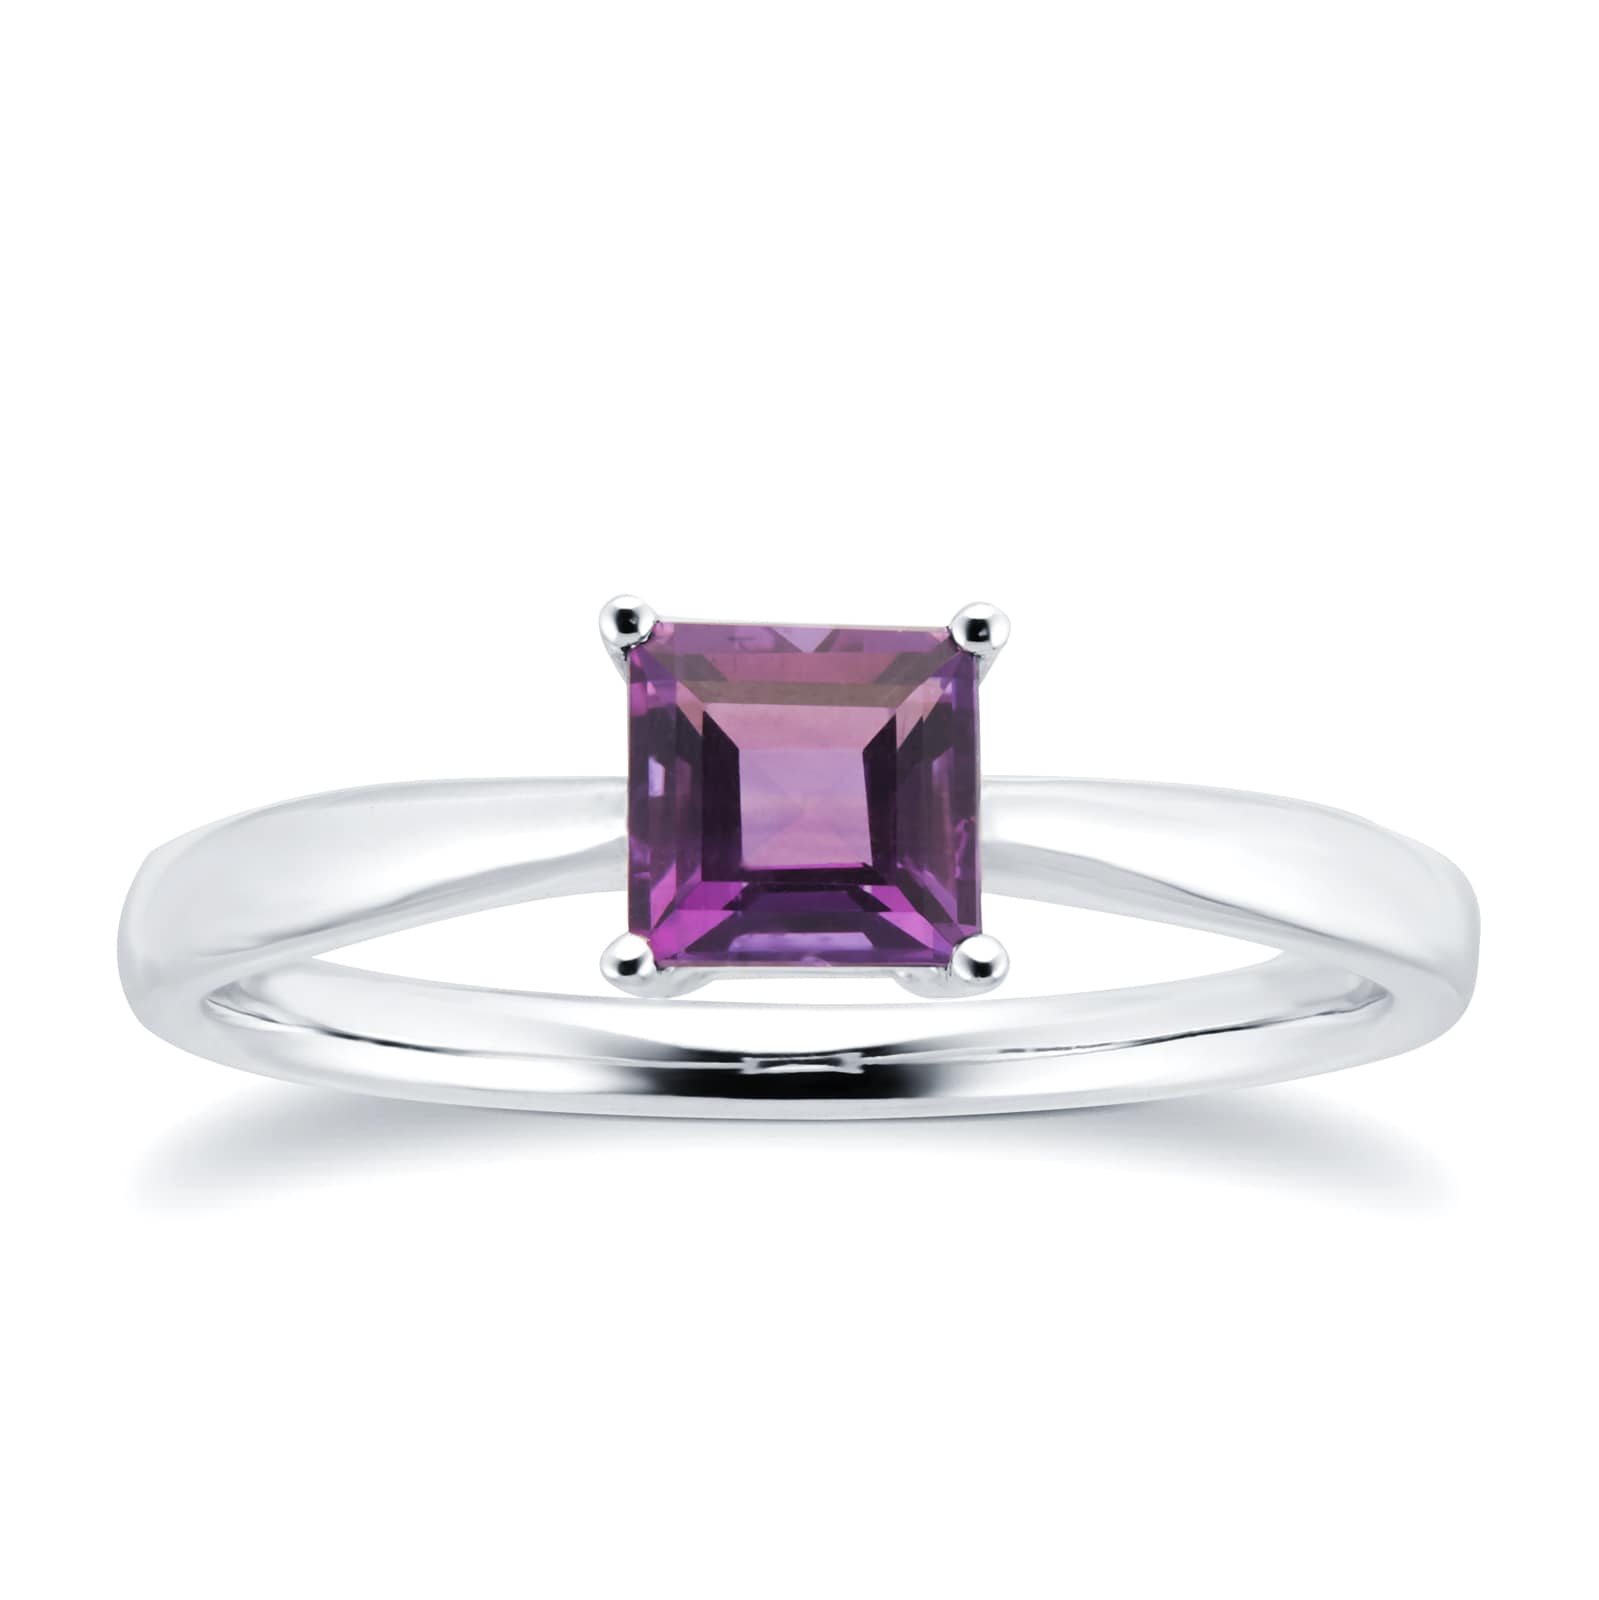 9ct White Gold 4 Claw Square Amethyst 5mm x 5mm Ring- Ring Size I.5